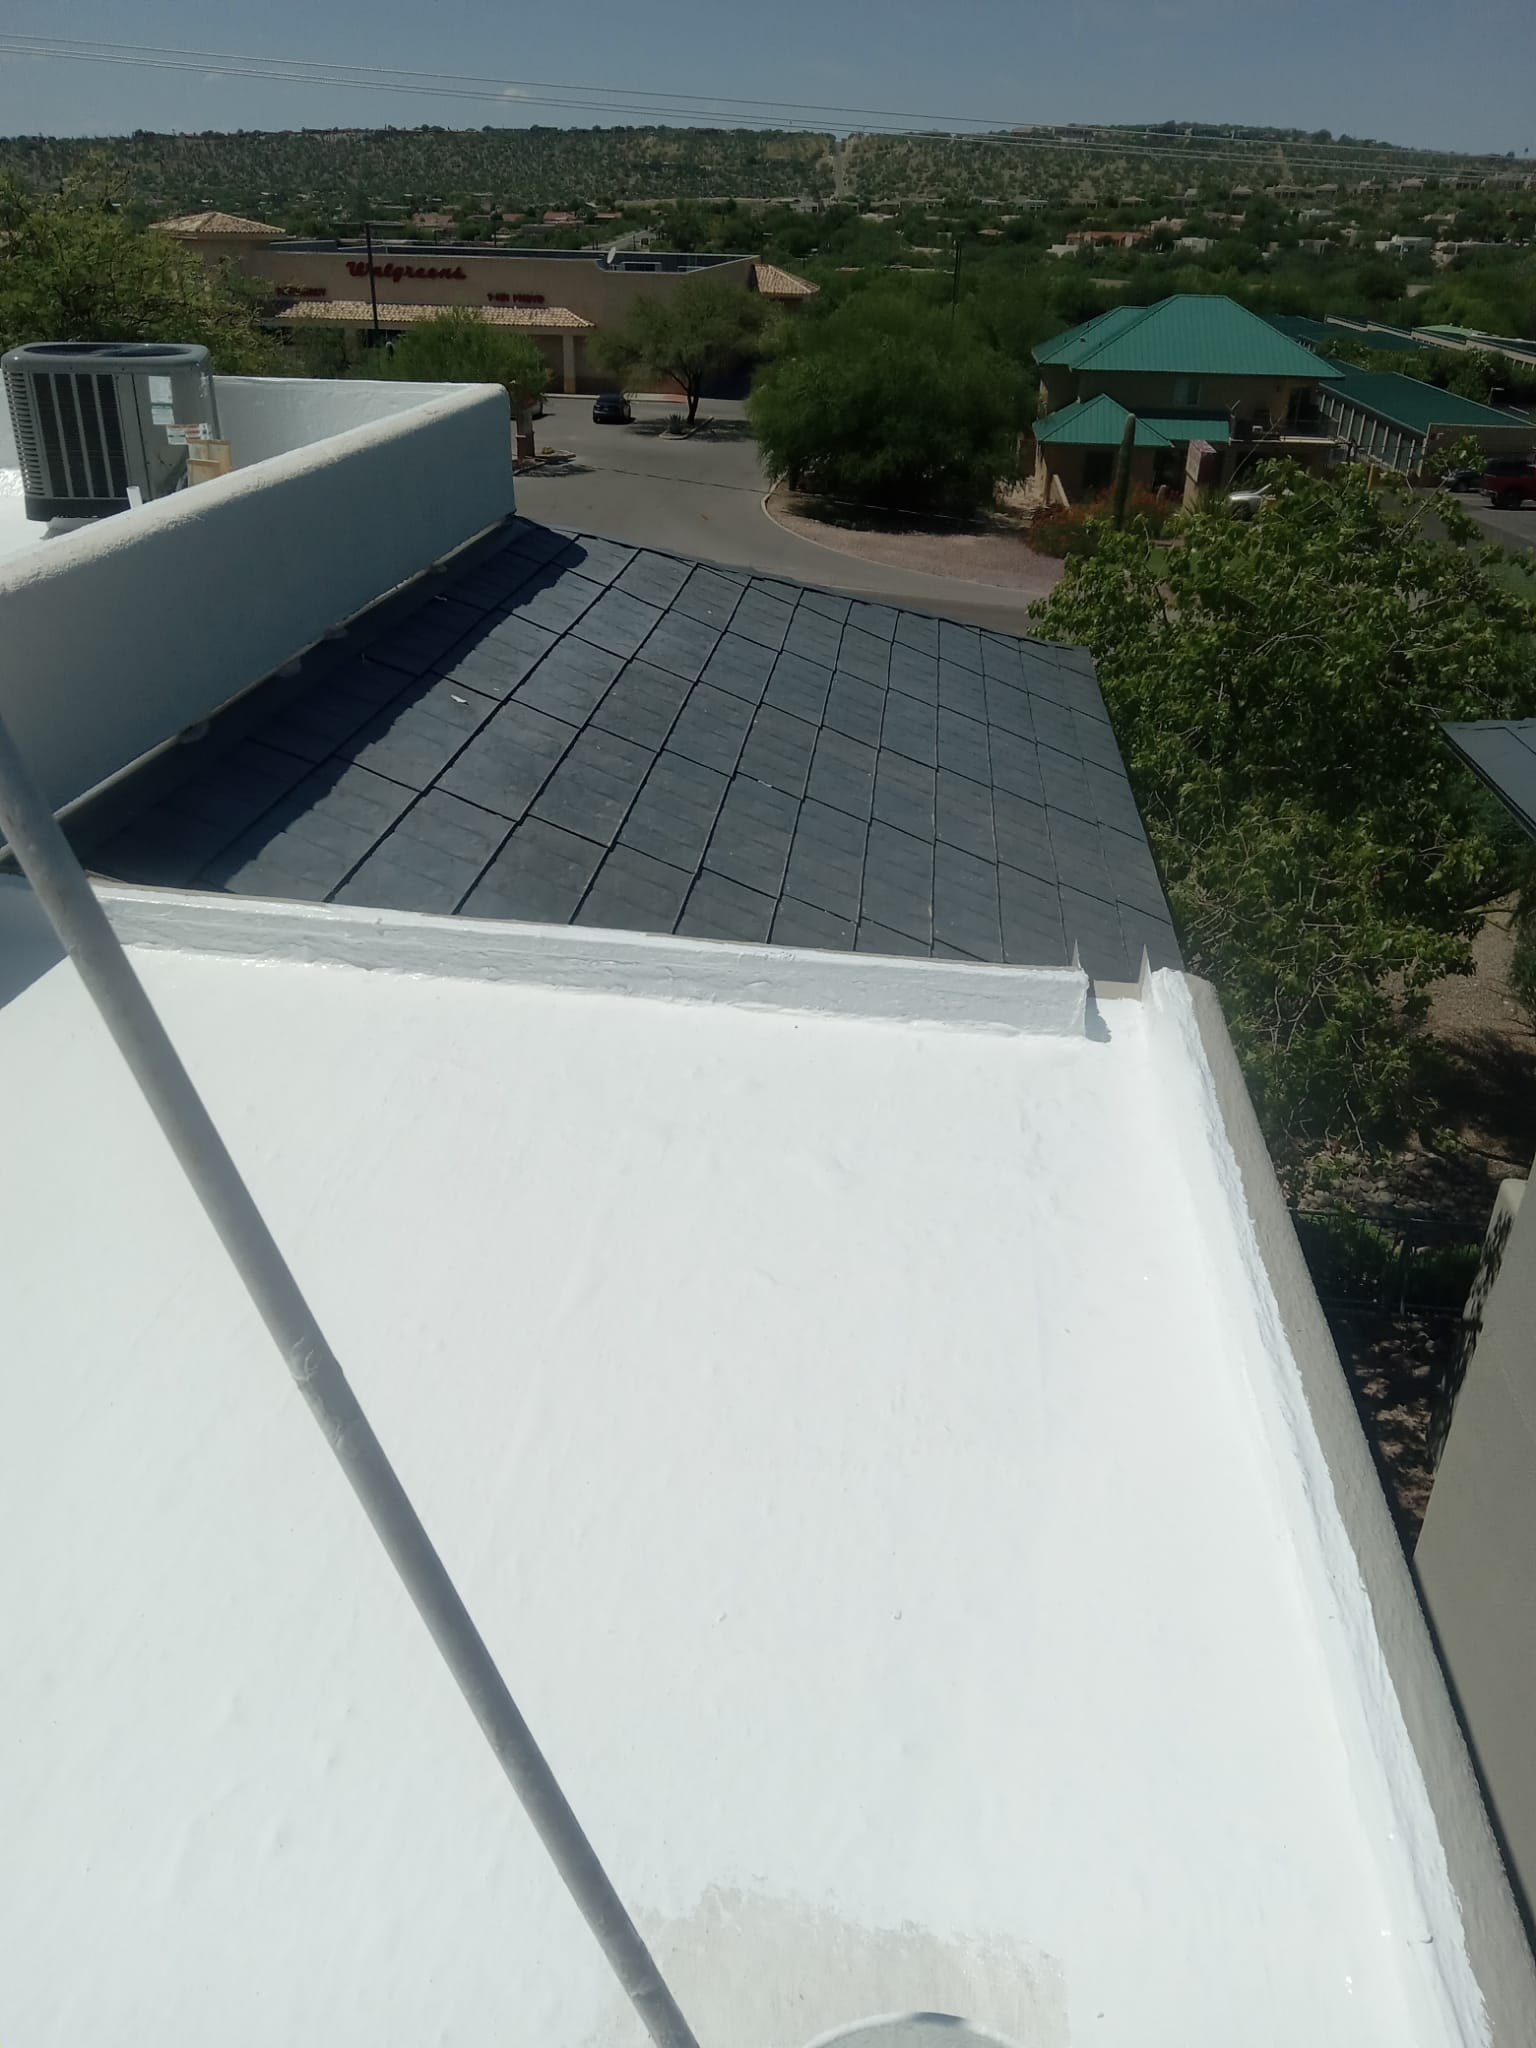 Elevated view of a Mesa property showcasing a fresh spray foam coating beside a classic tile roof section.